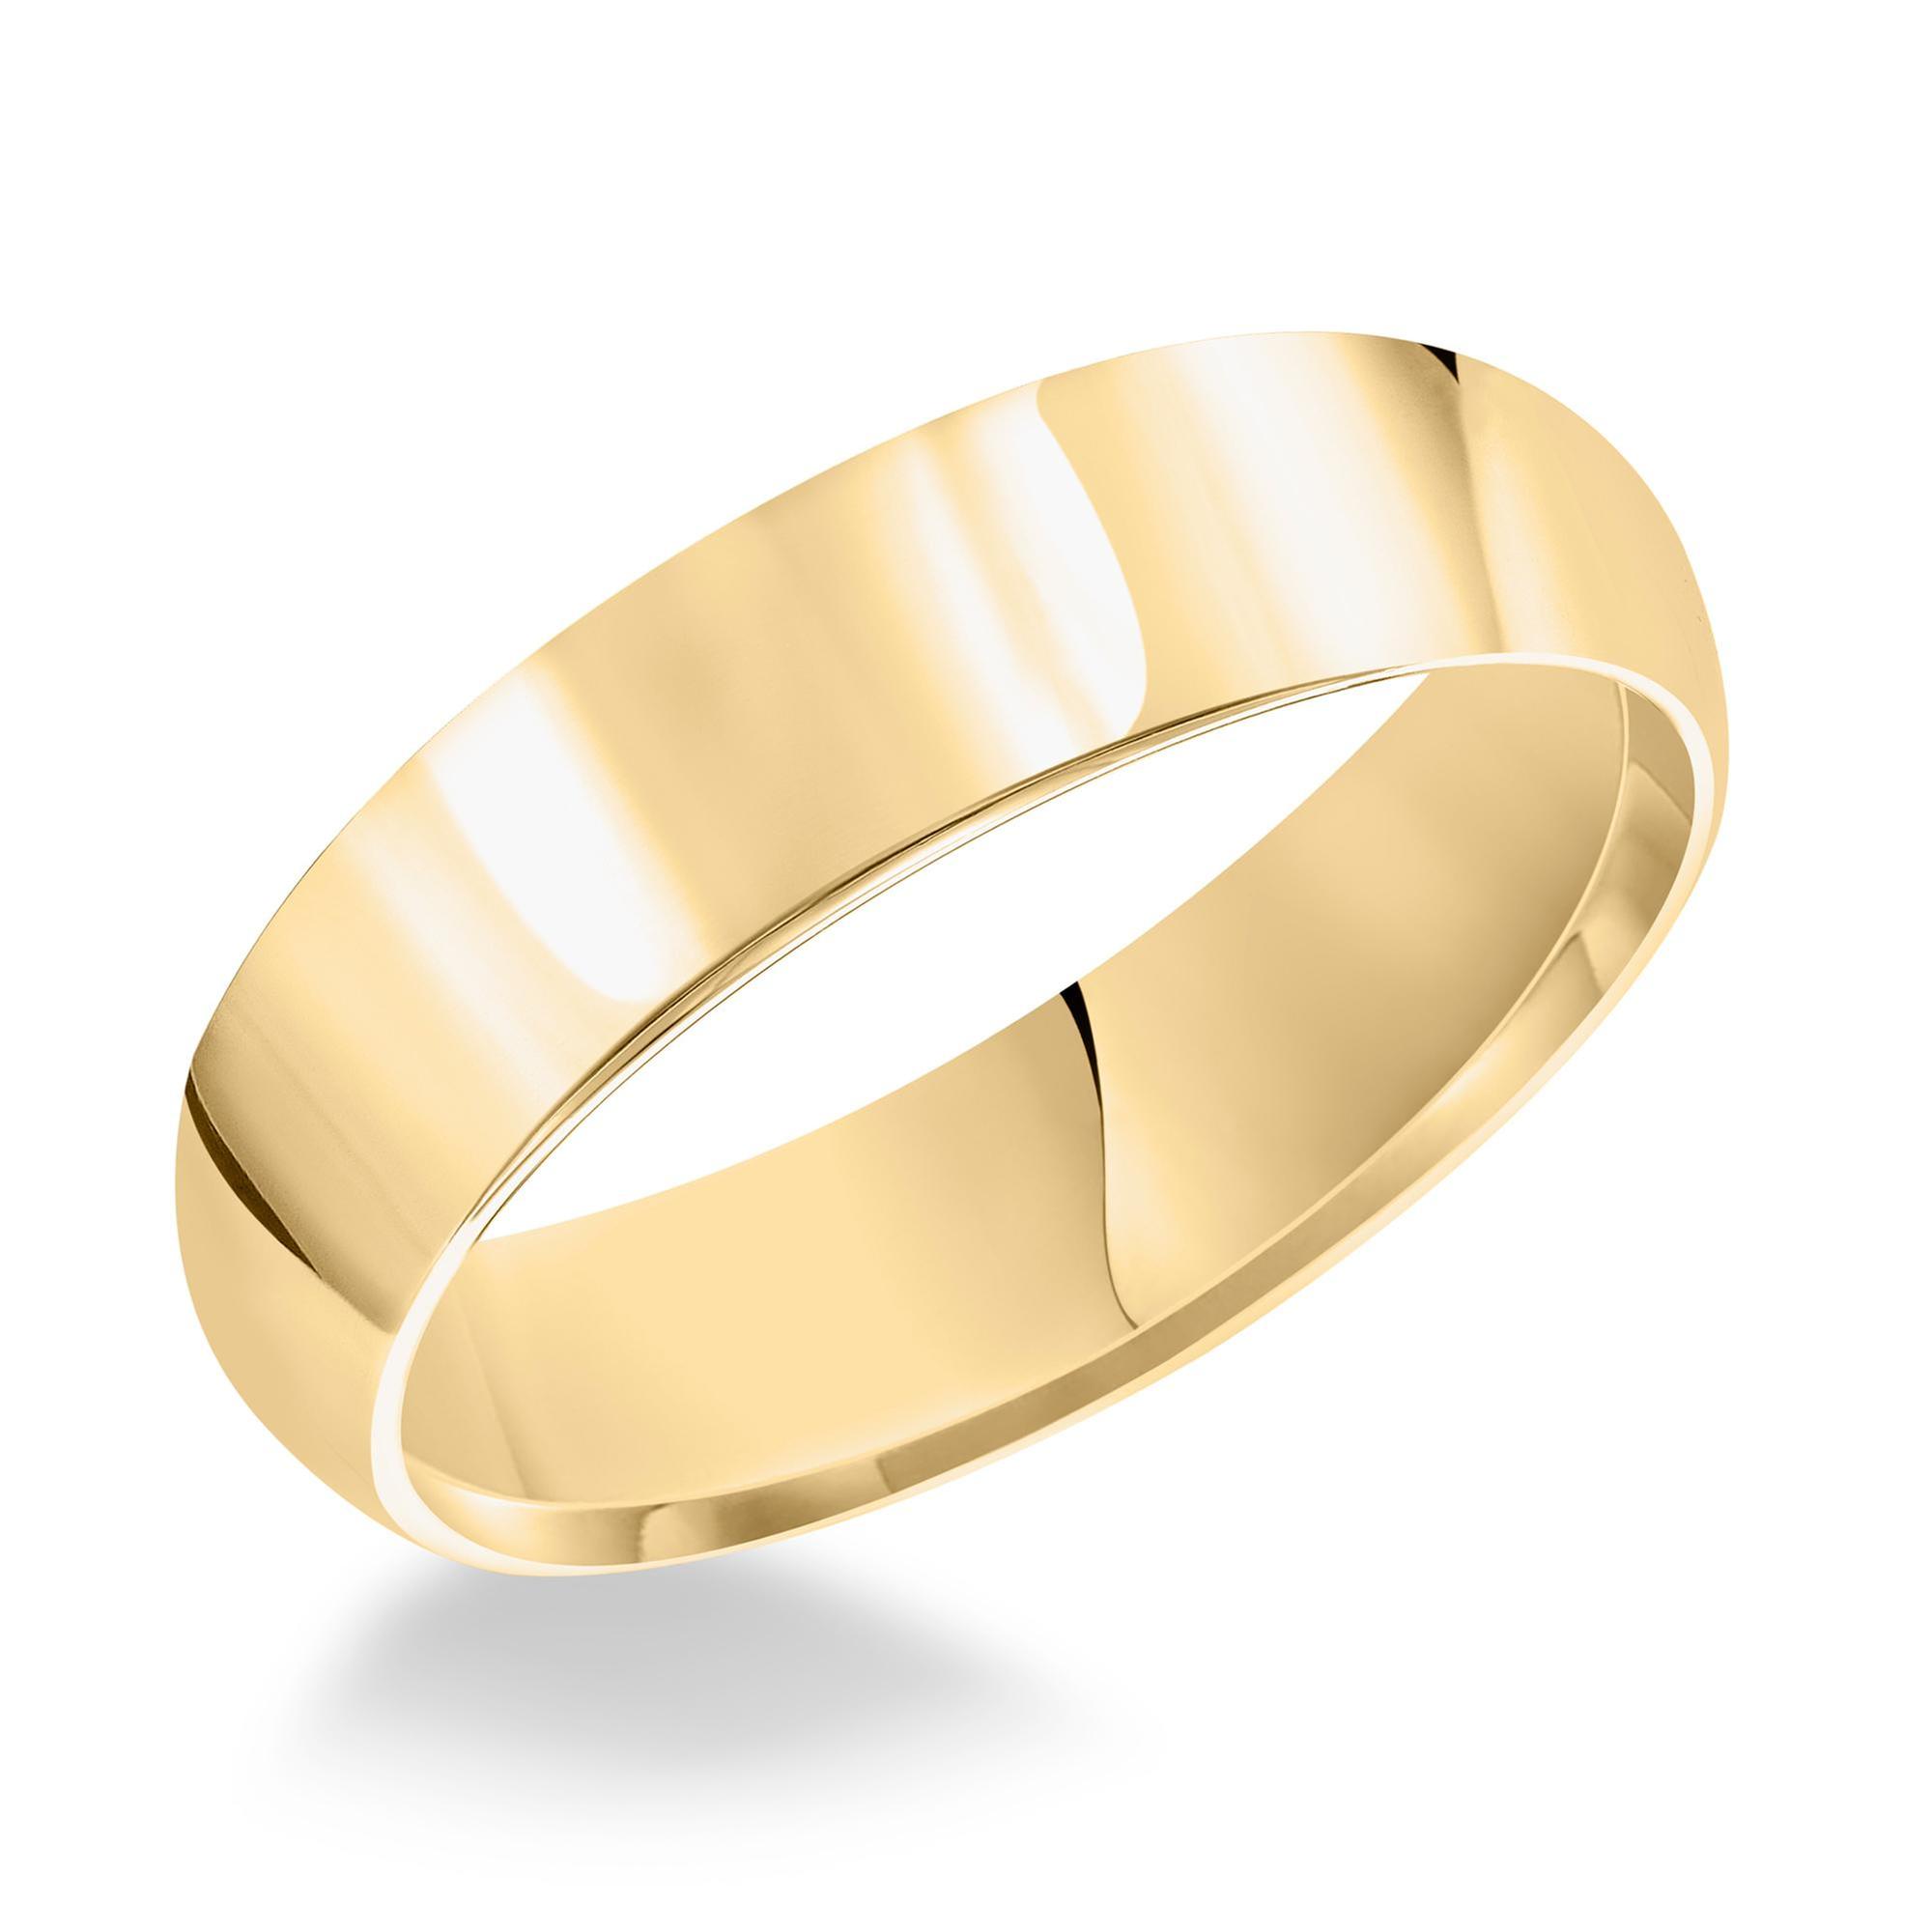 Paradise Jewelers 14K Solid Yellow Gold 3MM Plain Regular Fit Wedding Band